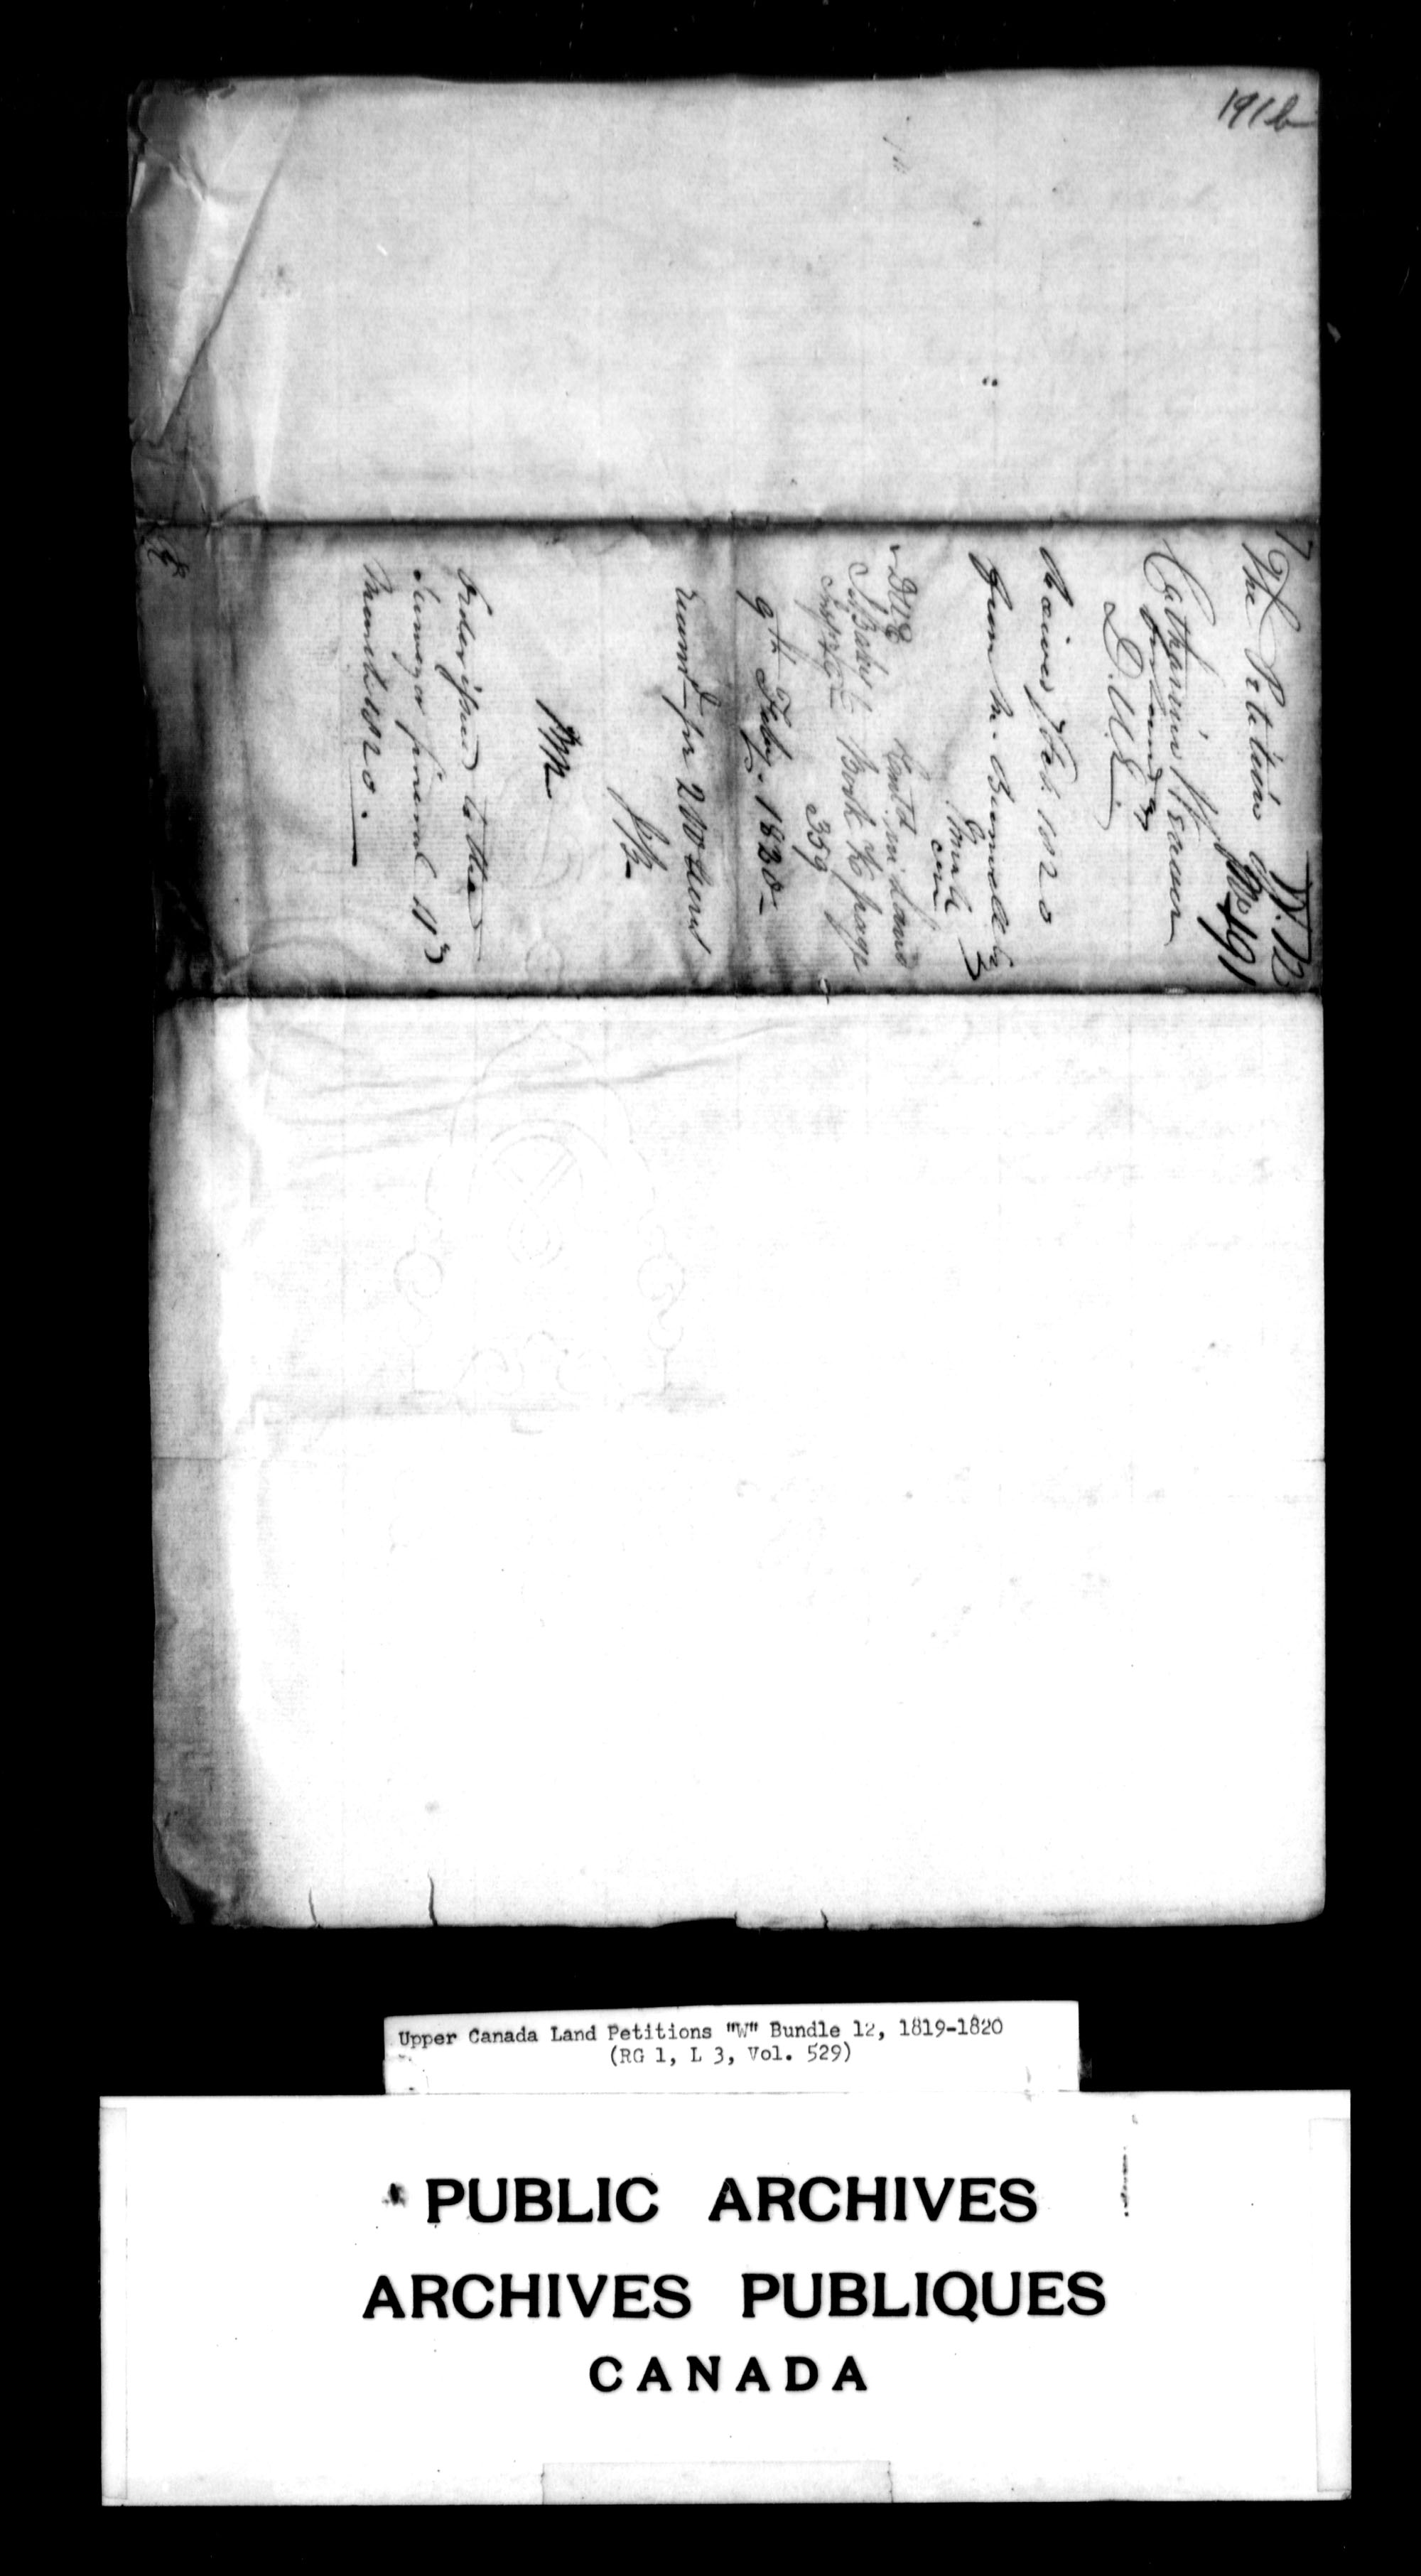 Title: Upper Canada Land Petitions (1763-1865) - Mikan Number: 205131 - Microform: c-2954